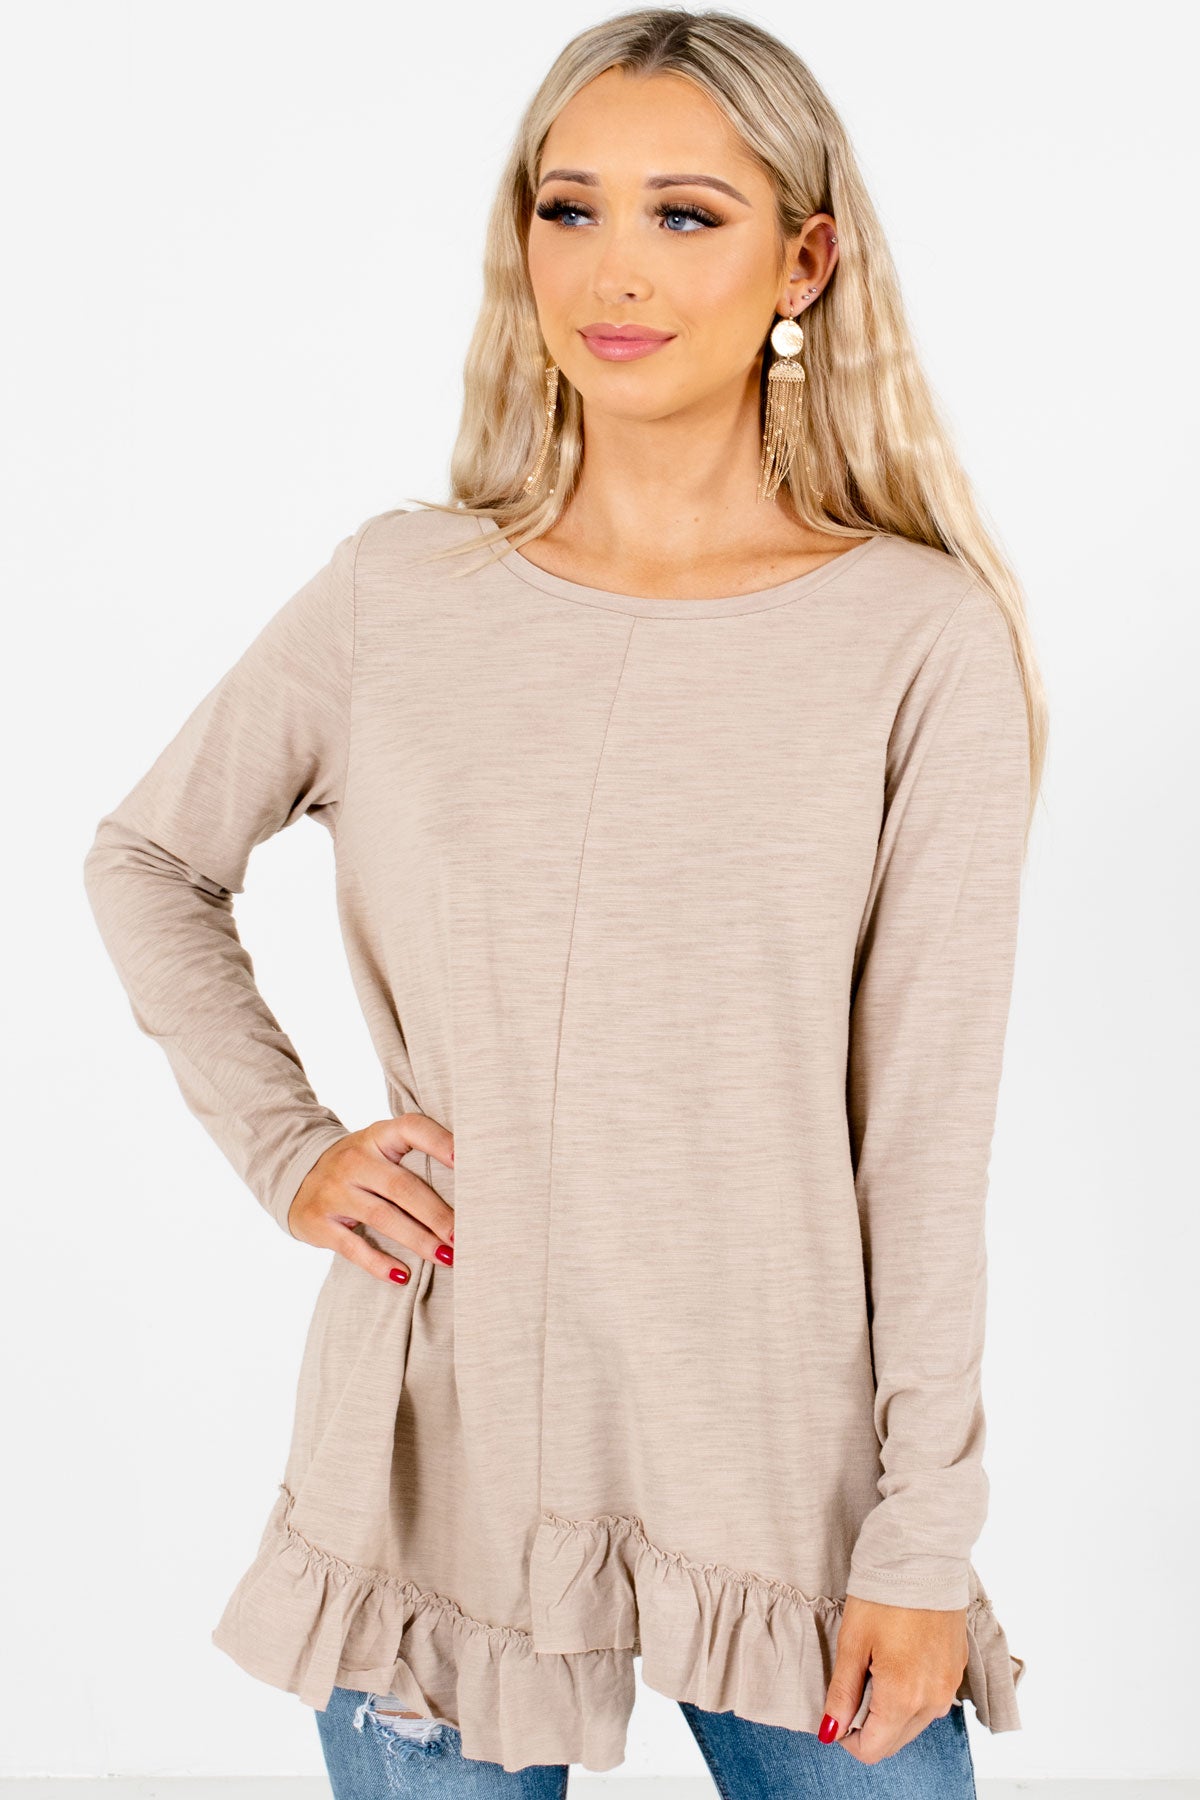 Tan Brown Cute and Comfortable Boutique Tops for Women